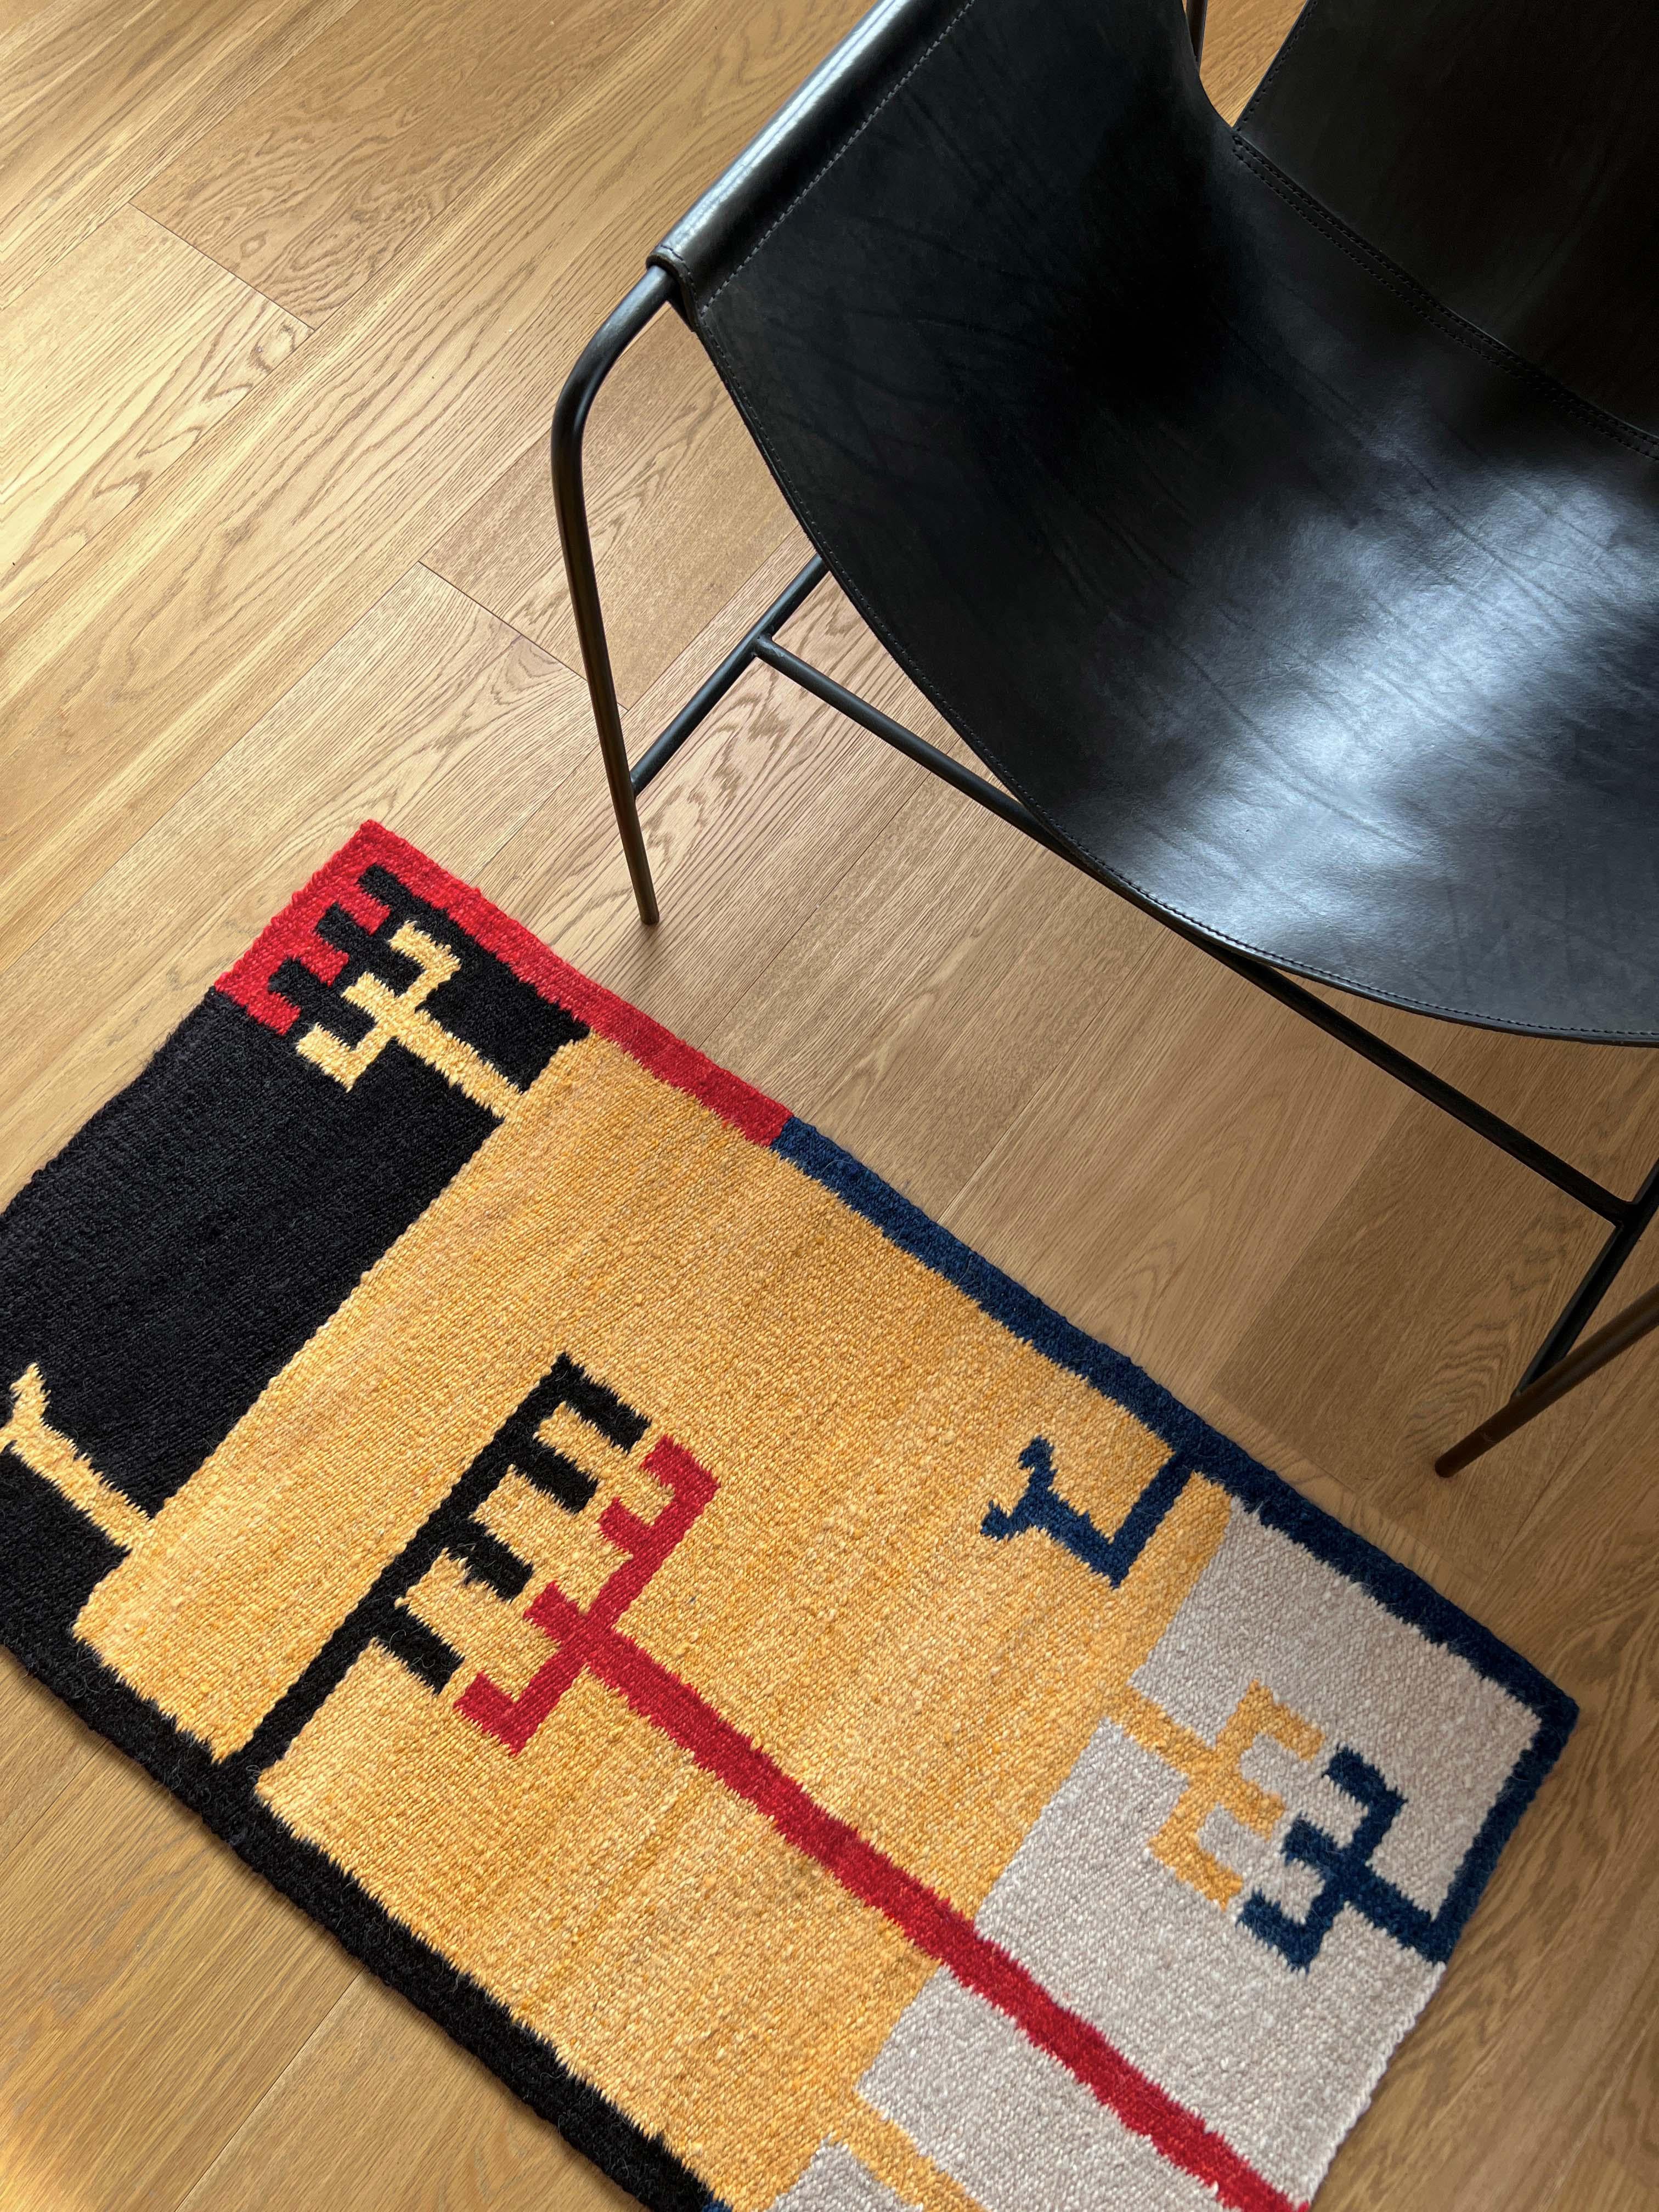 Adapted from the original design by Victor Grippo, Untitled, 1966.

Limited edition of 8 handmade and unique rugs.   

LALANA RUGS is an applied arts initiative born from the desire to combine proposals by contemporary artists with traditional local